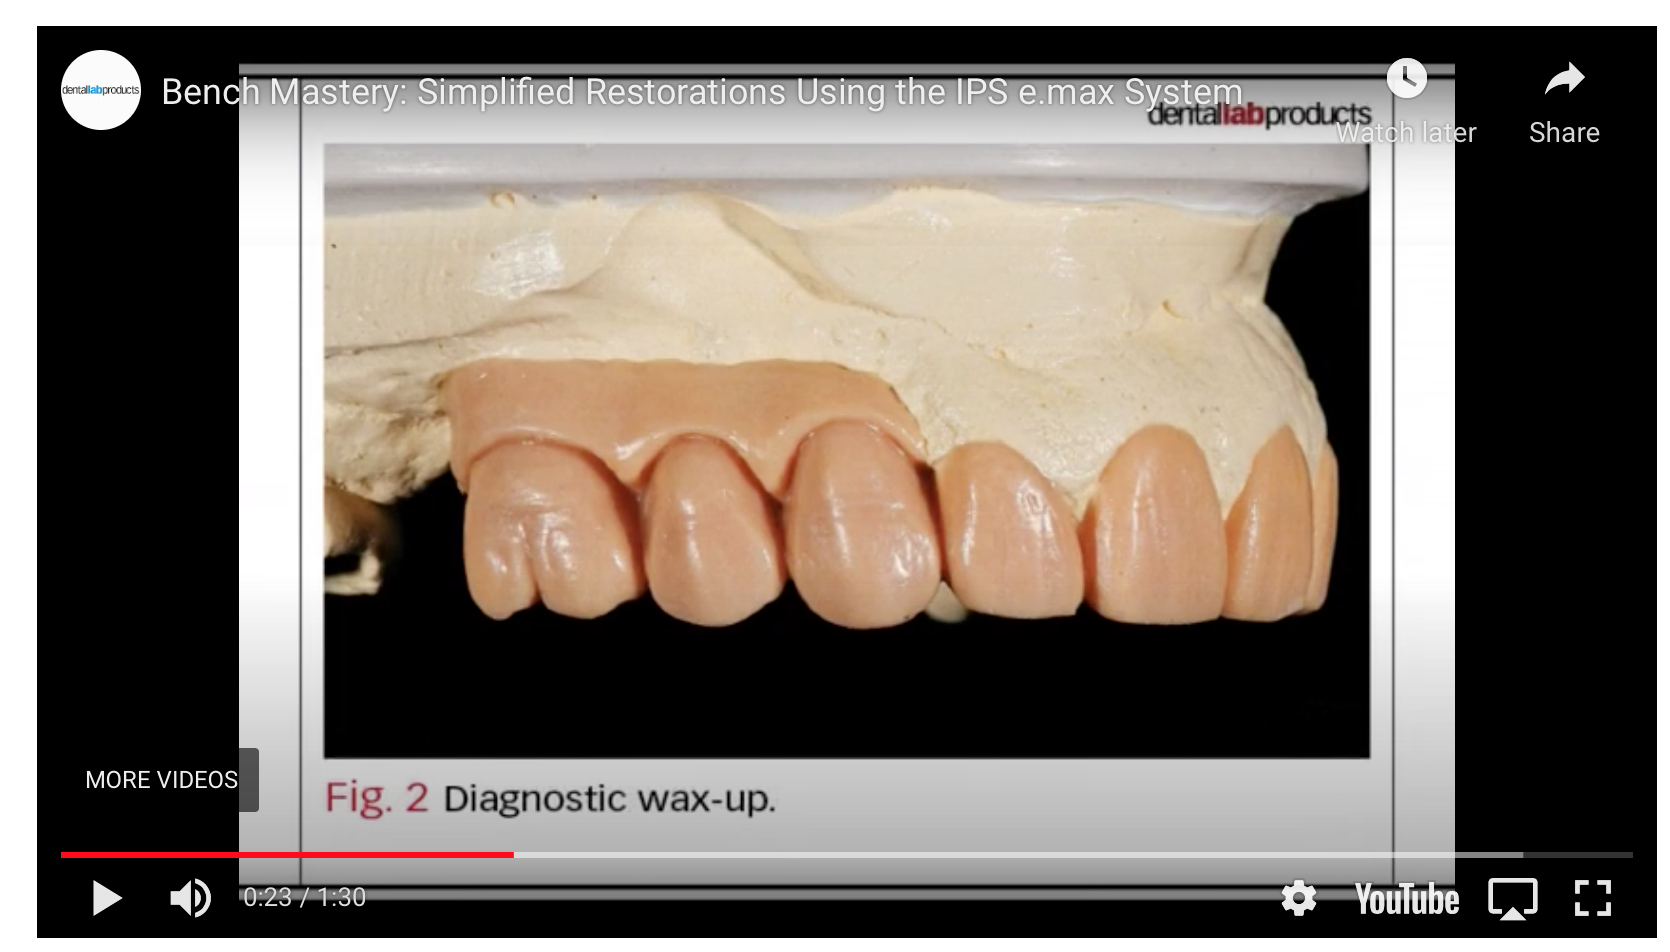 How to use IPS e.max for simpler restorations [VIDEO]